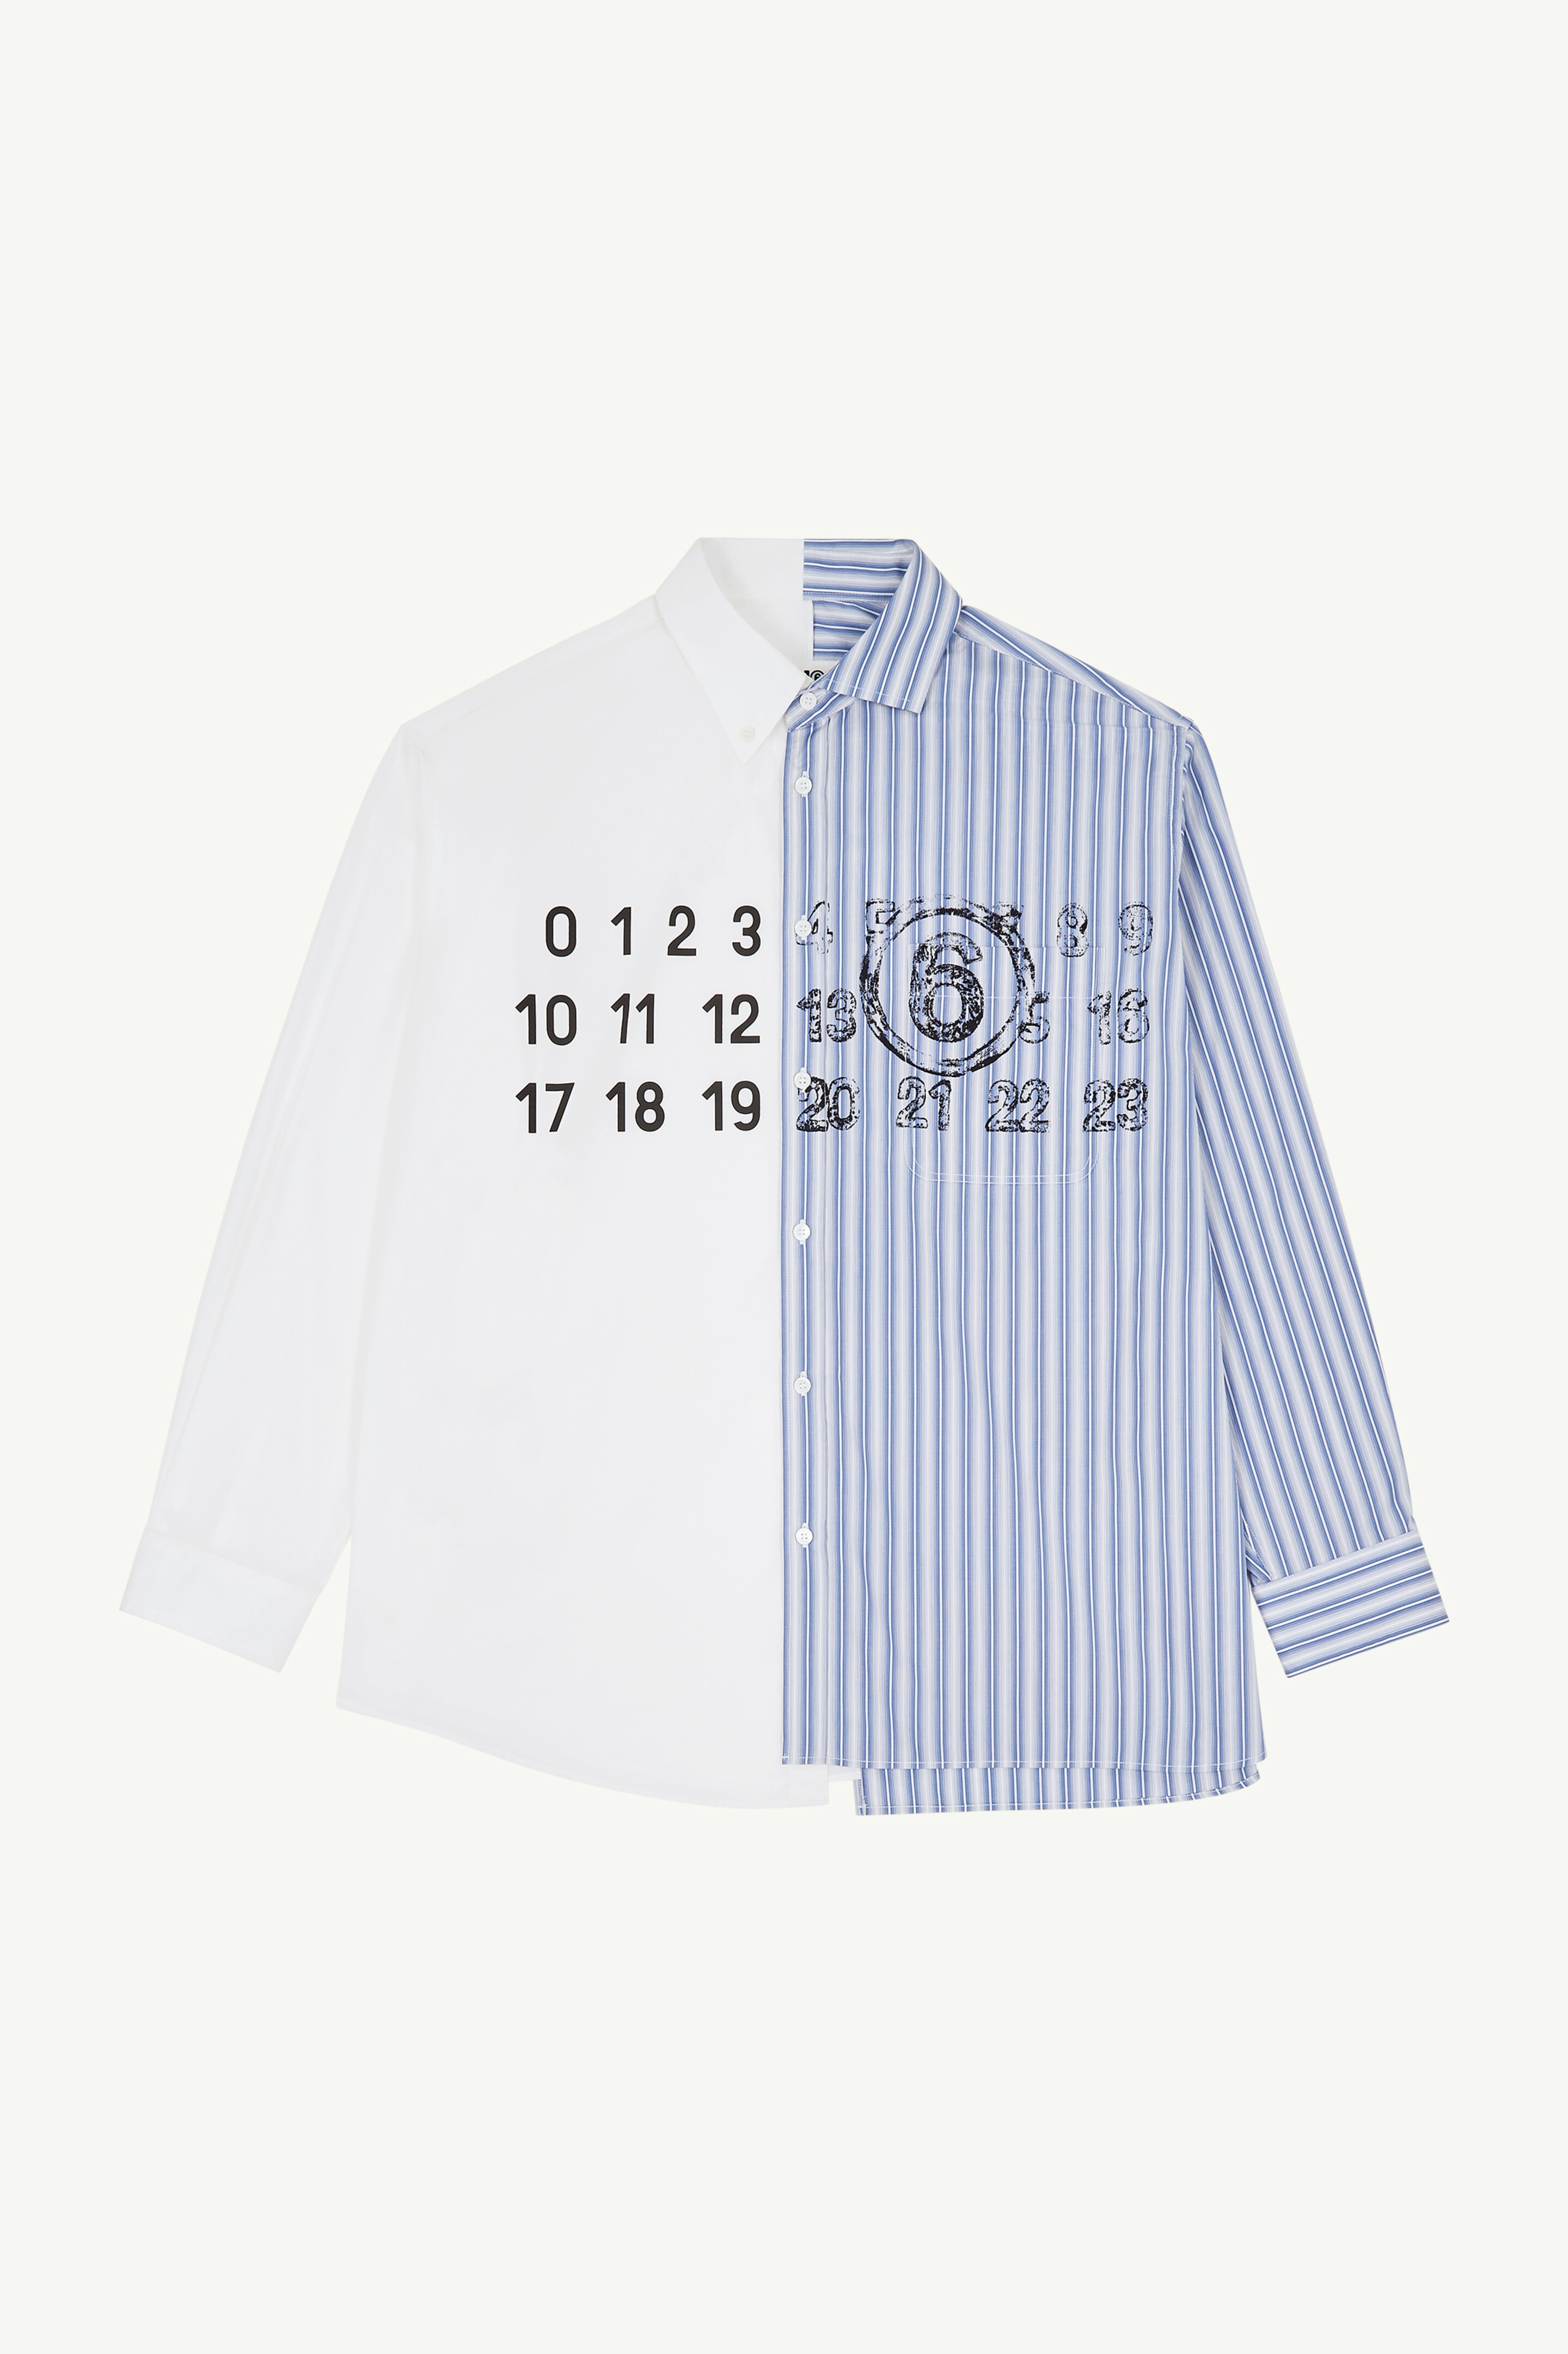 Spliced numbers shirt - 1